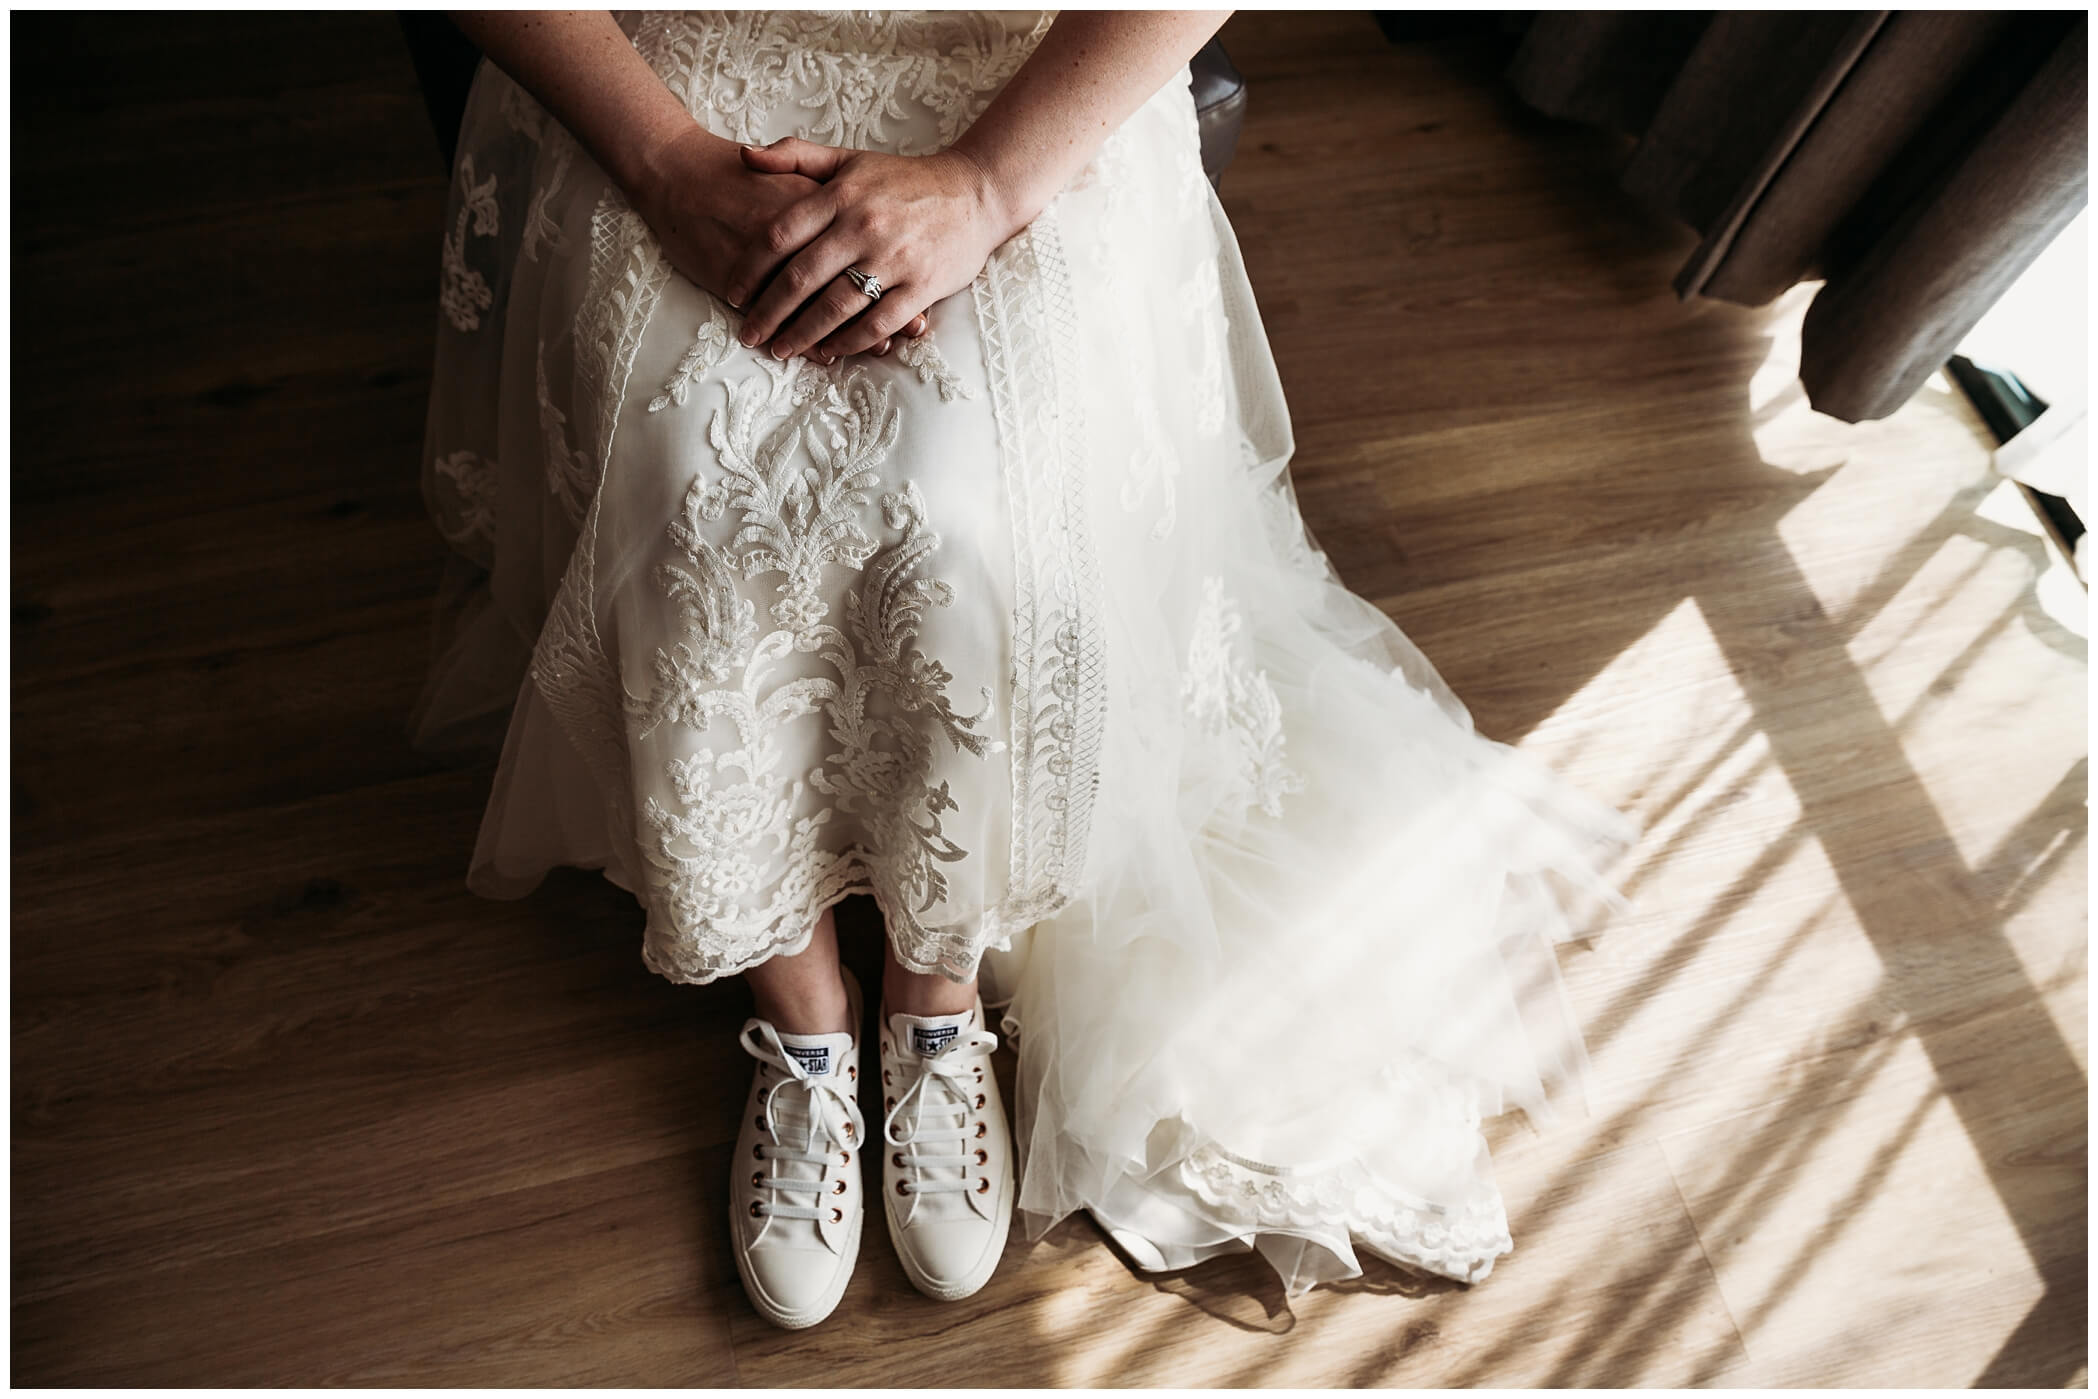 The Bride's custom converse for her wedding day.